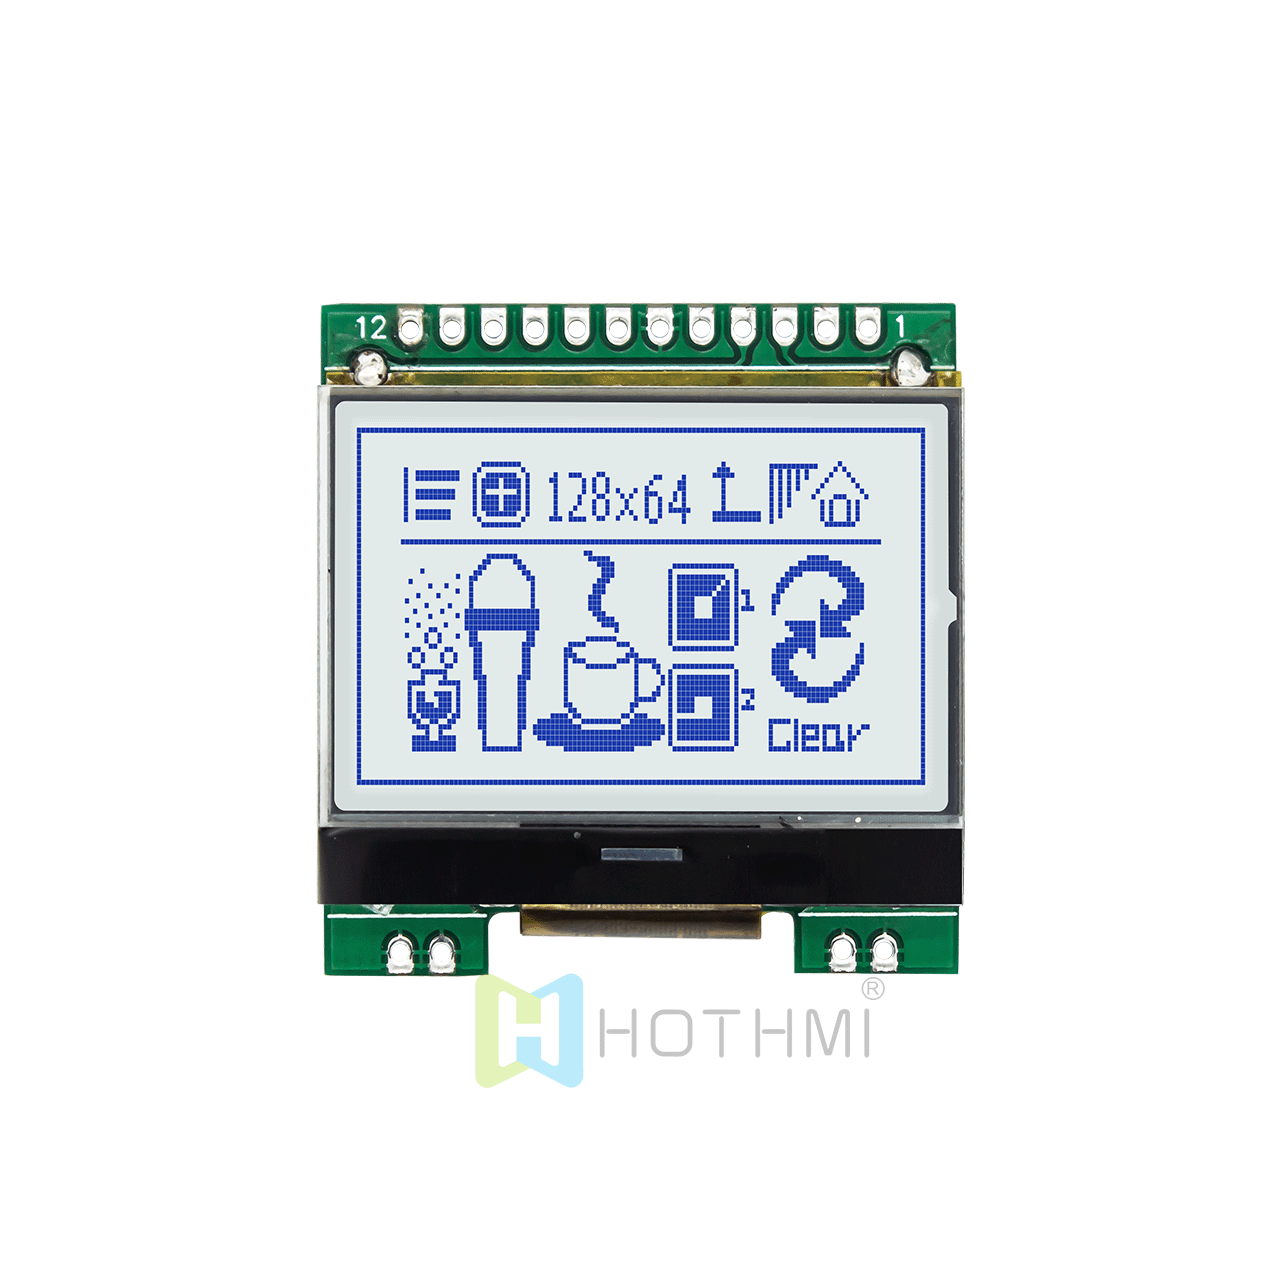 1.7"LCD12864, low price 128x64 gray background blue letter module, graphic COB module, supports 3.3V/5V, ST7567 controller